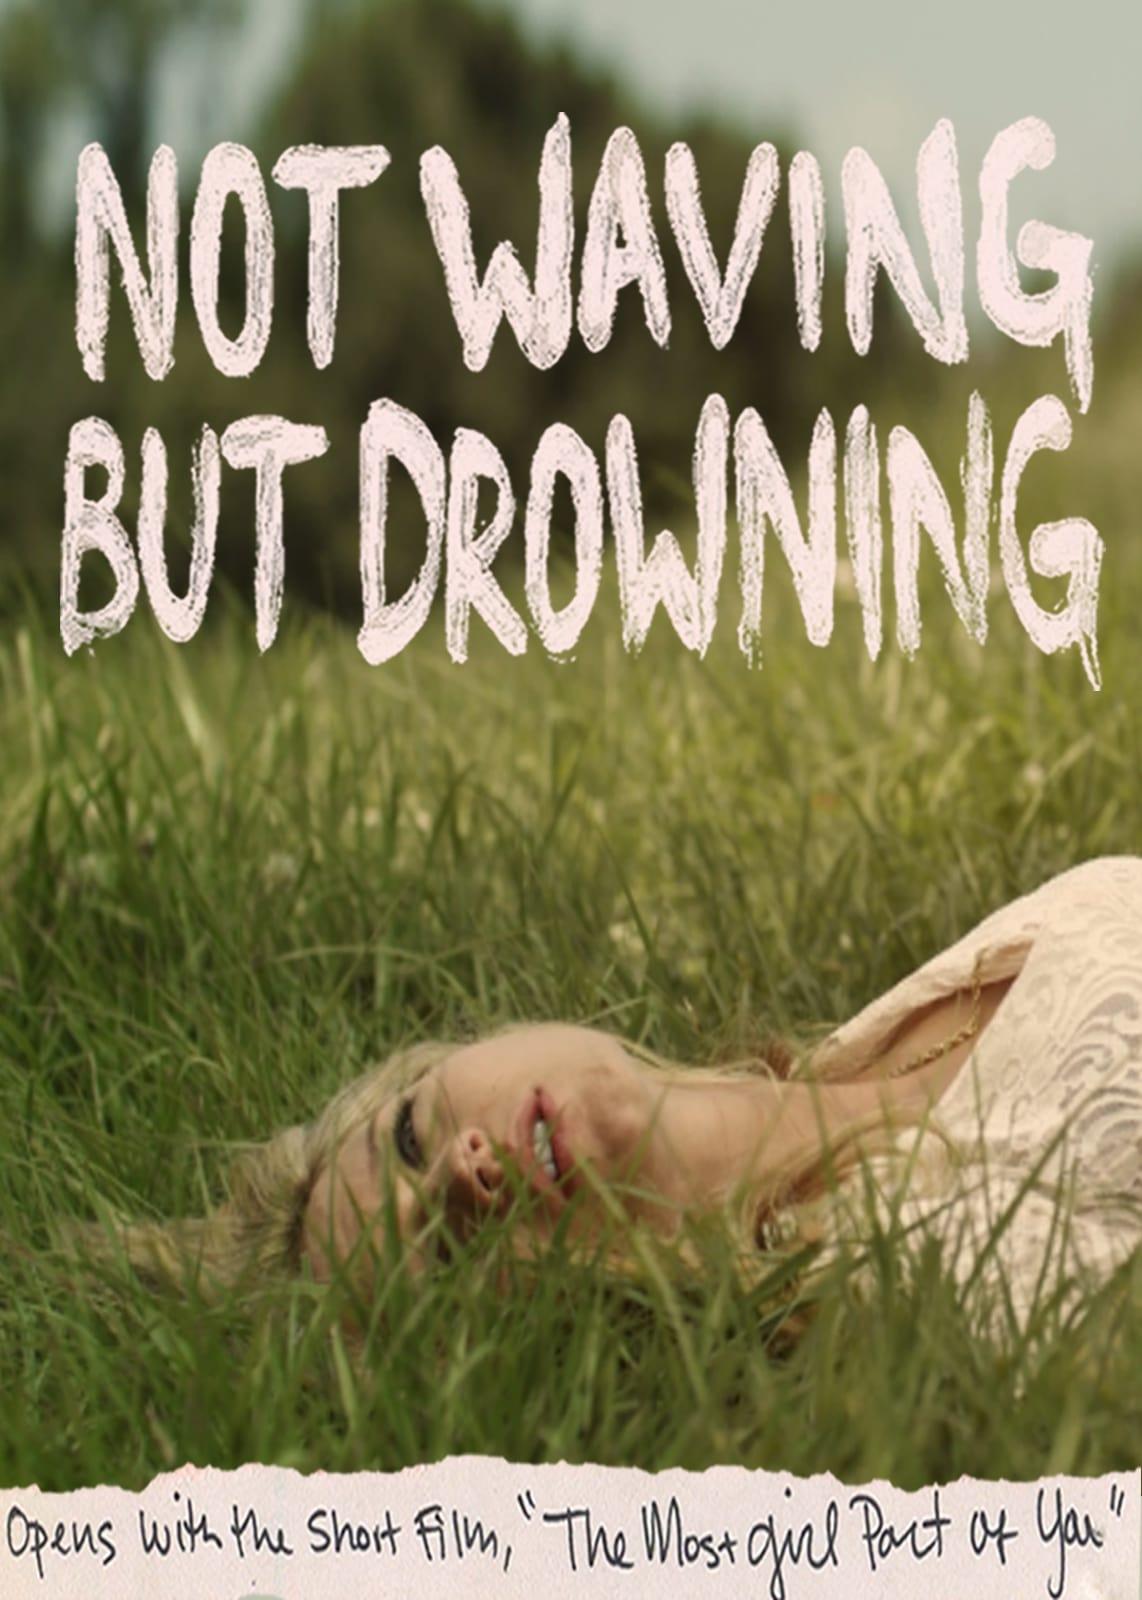 Not Waving but Drowning poster